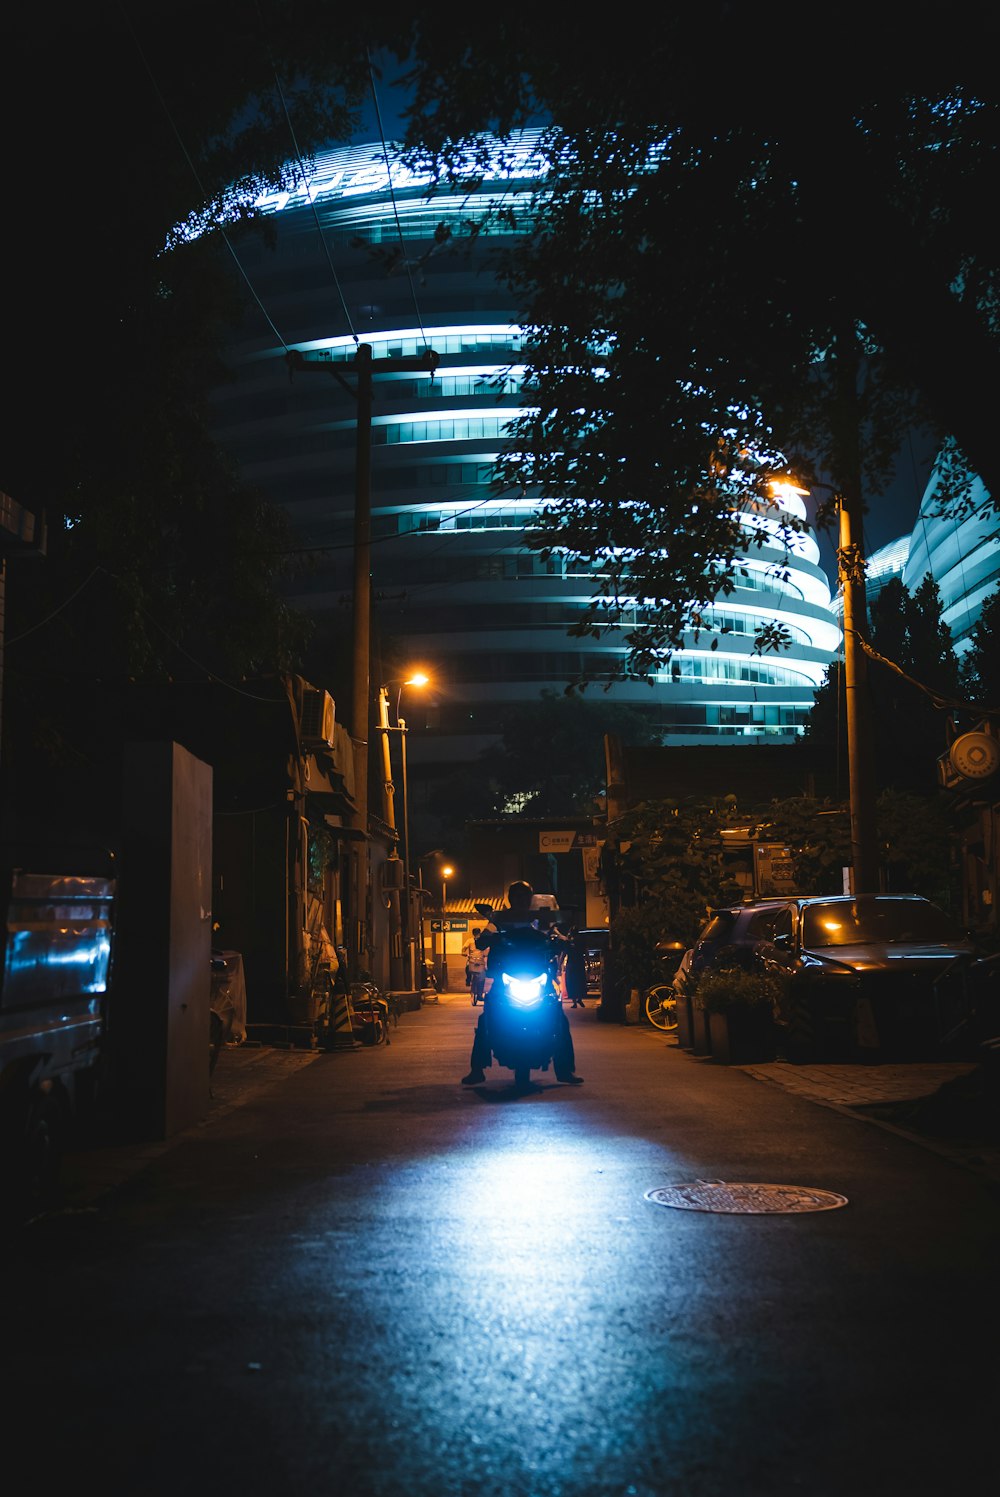 man in blue shirt riding motorcycle on road during night time